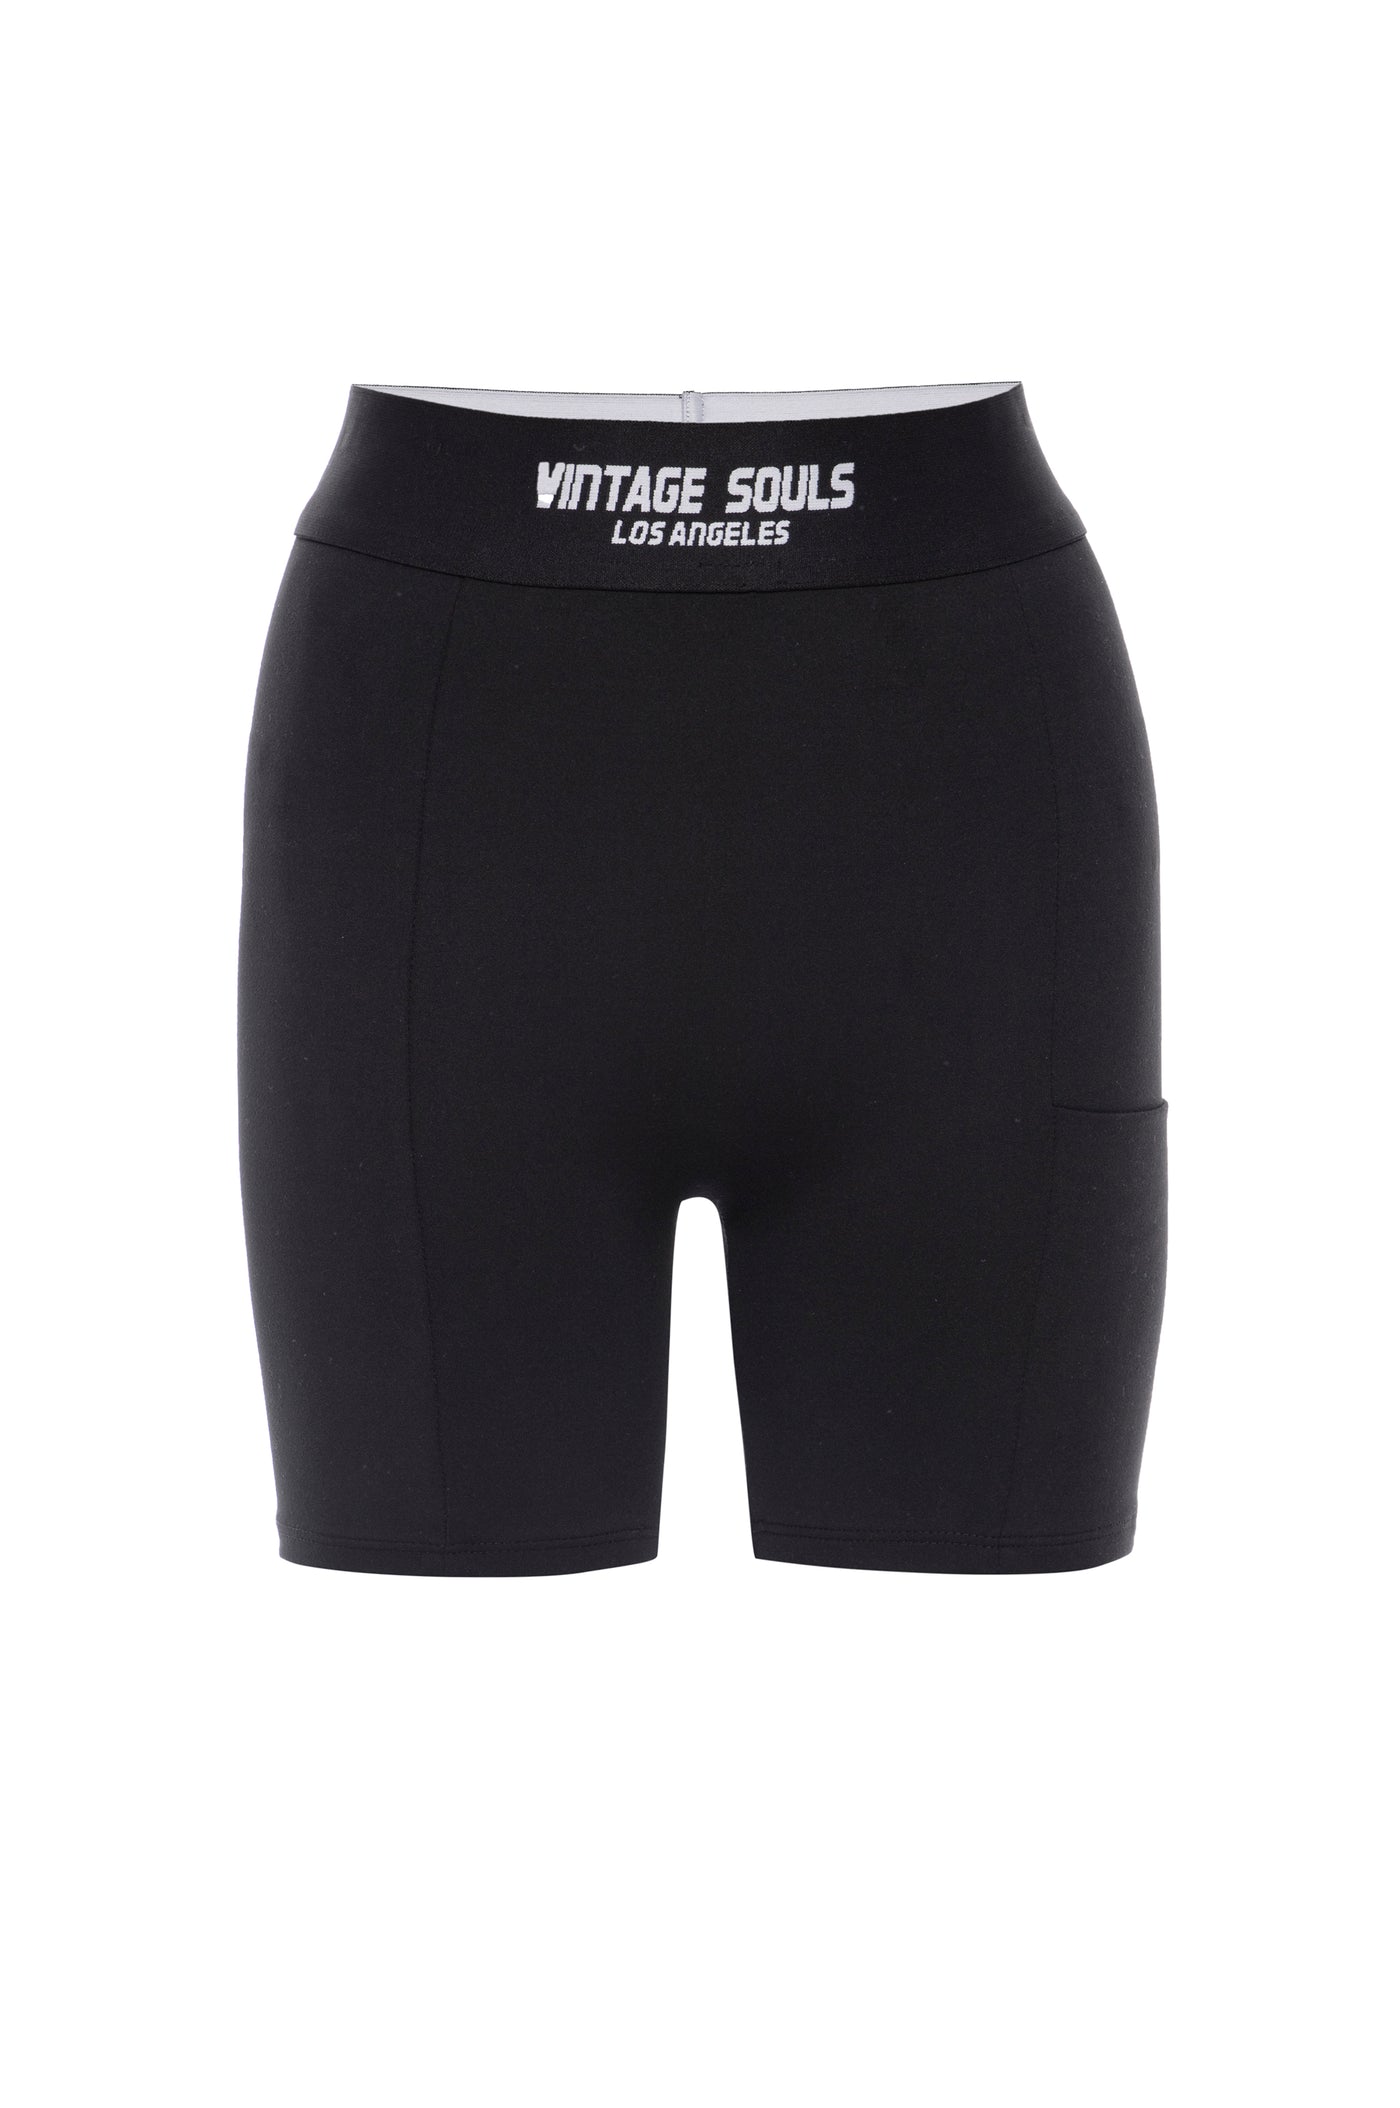 Black Active Biker Shorts with logo waistband and side pocket, crafted in LA from quality performance fabric.